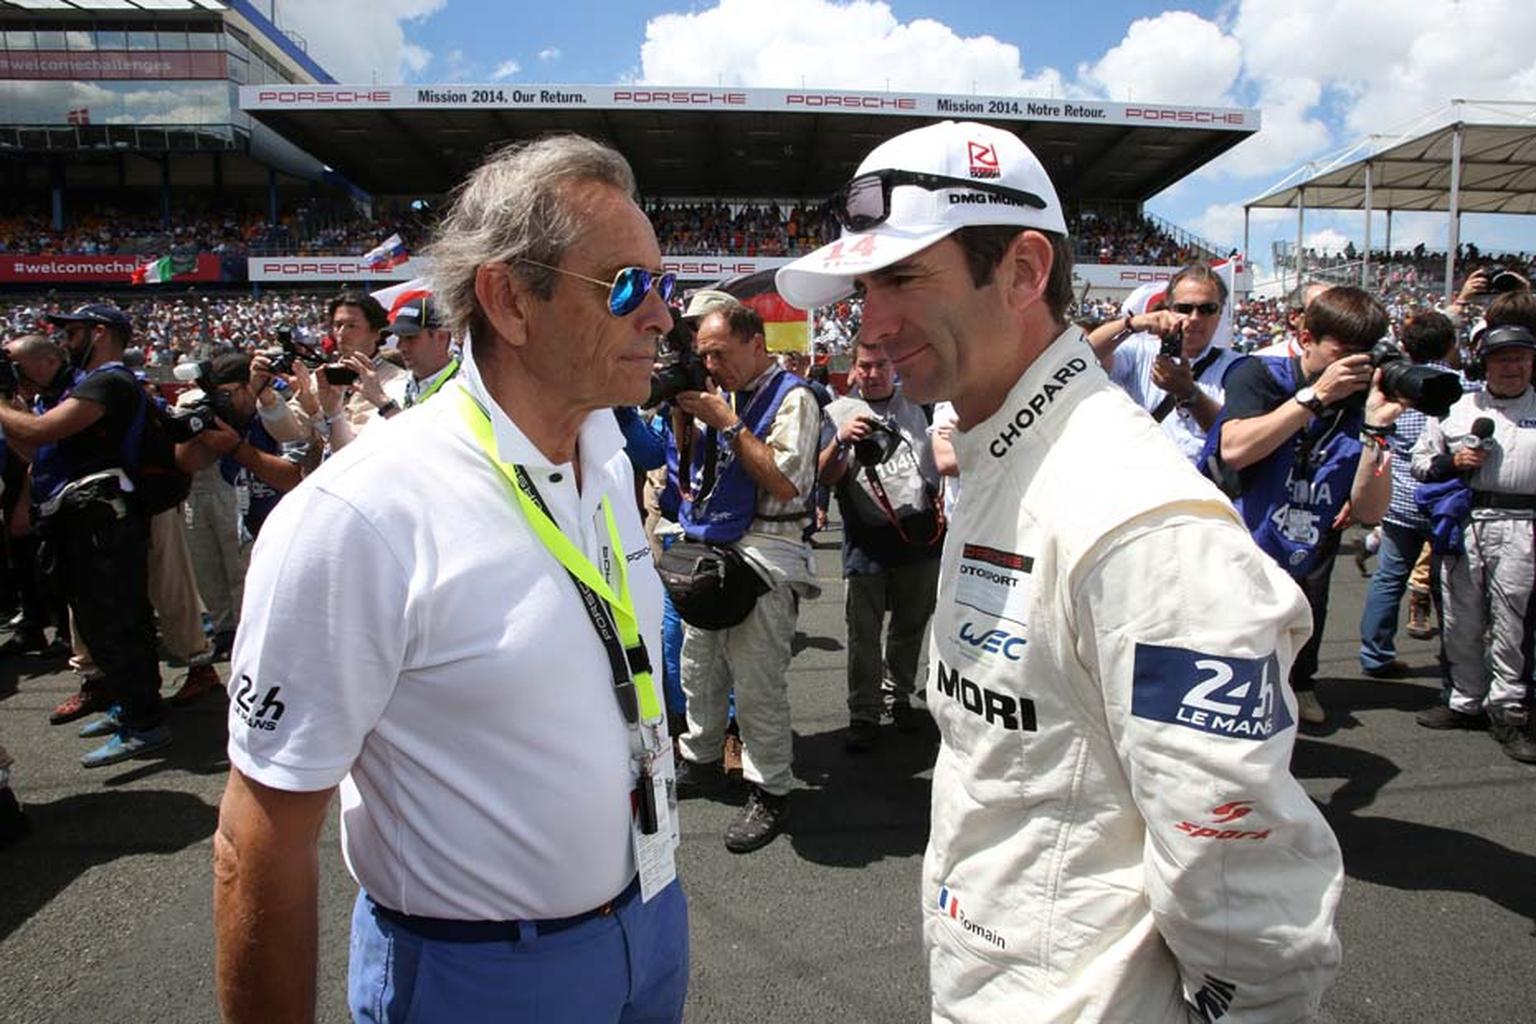 Romain Dumas and Mr Le Mans, aka Jacky Ickx, longstanding Chopard ambassador and six-time winner of the Le Mans race at the wheel of a Porsche, behind the scenes at the 2014 Le Mans race.